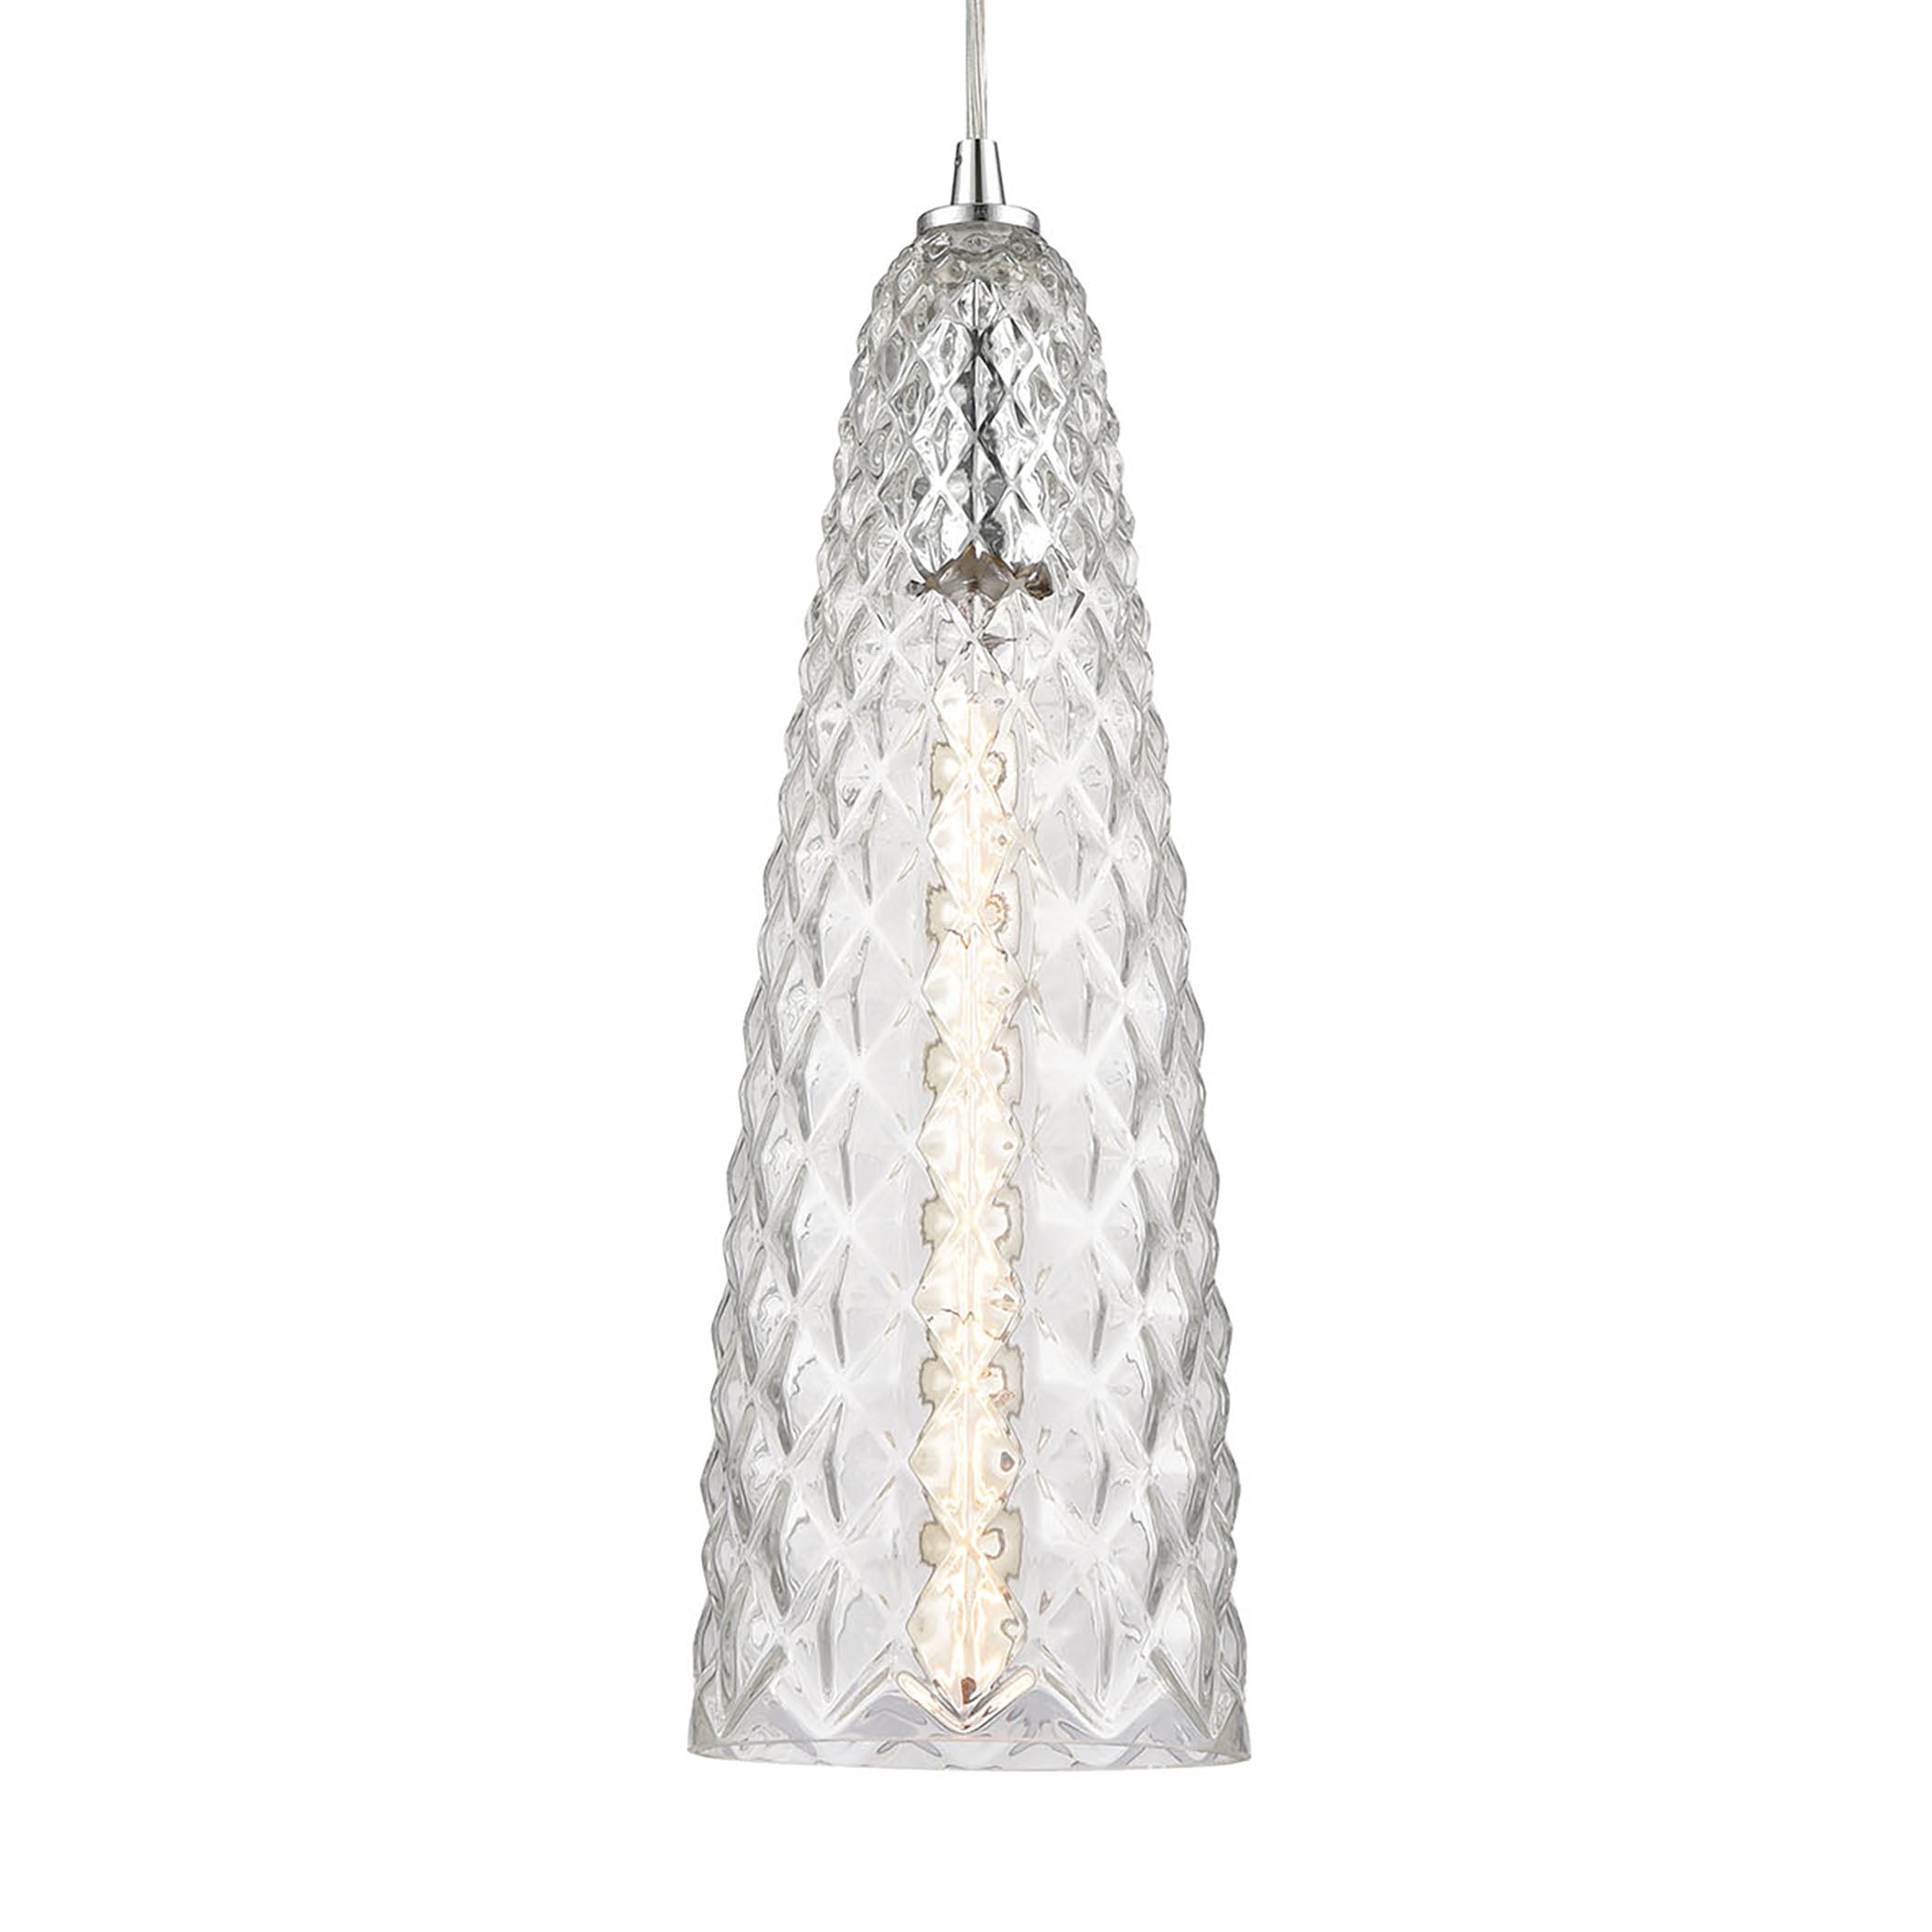 ELK Lighting 21167/1 Glitzy 1-Light Mini Pendant in Polished Chrome with Clear Glass